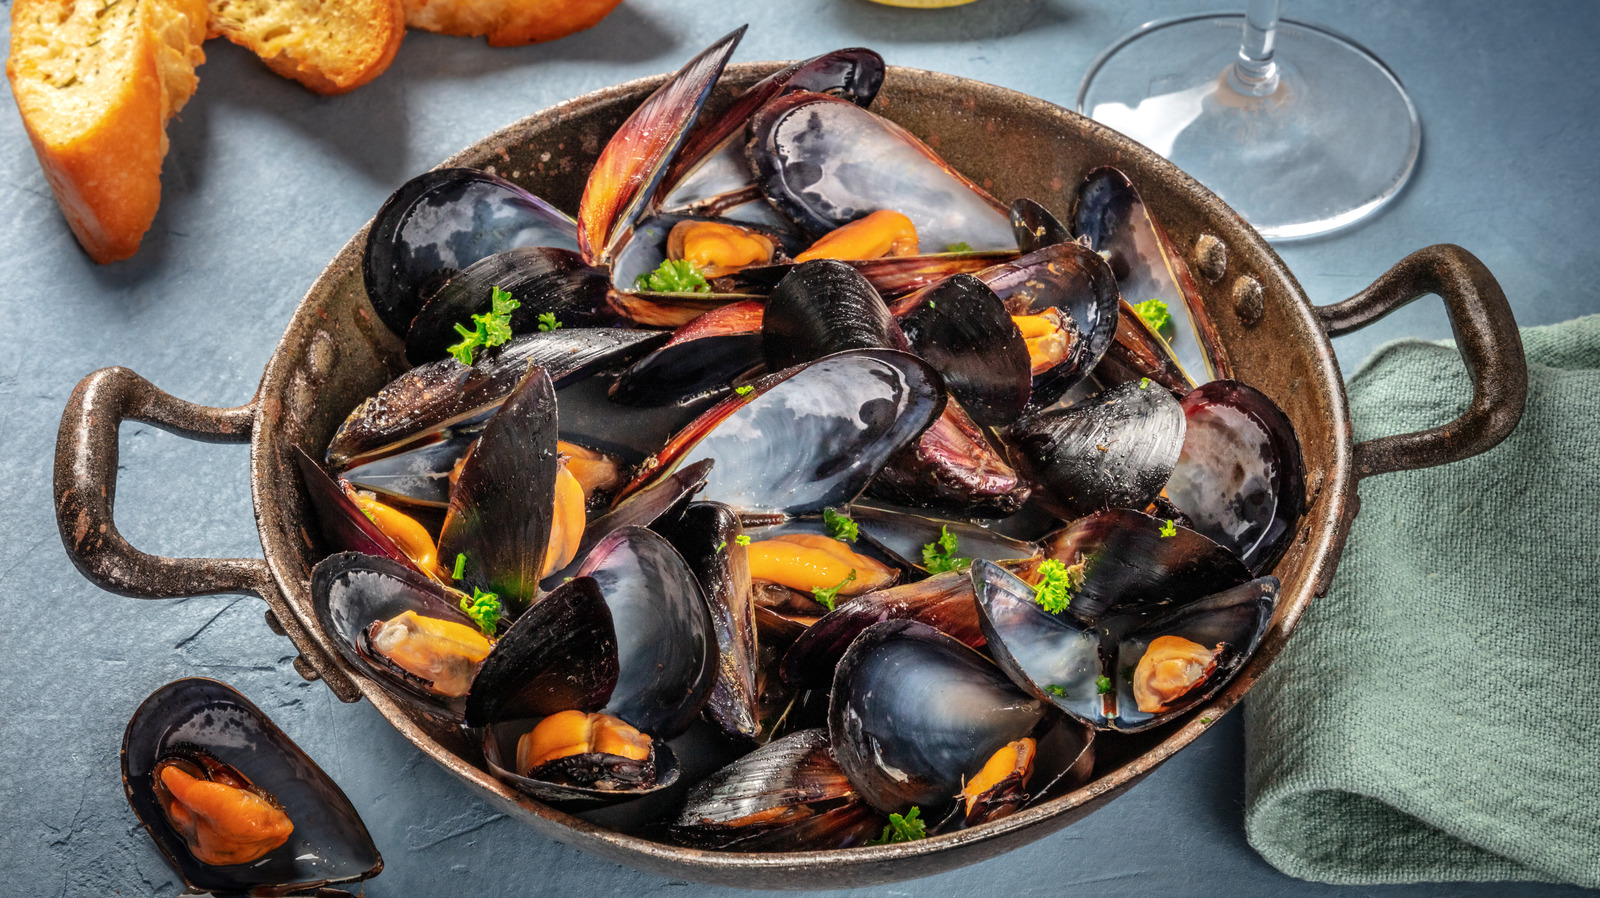 The Real Reason Shellfish-Related Food Poisoning Has Sharply Increased